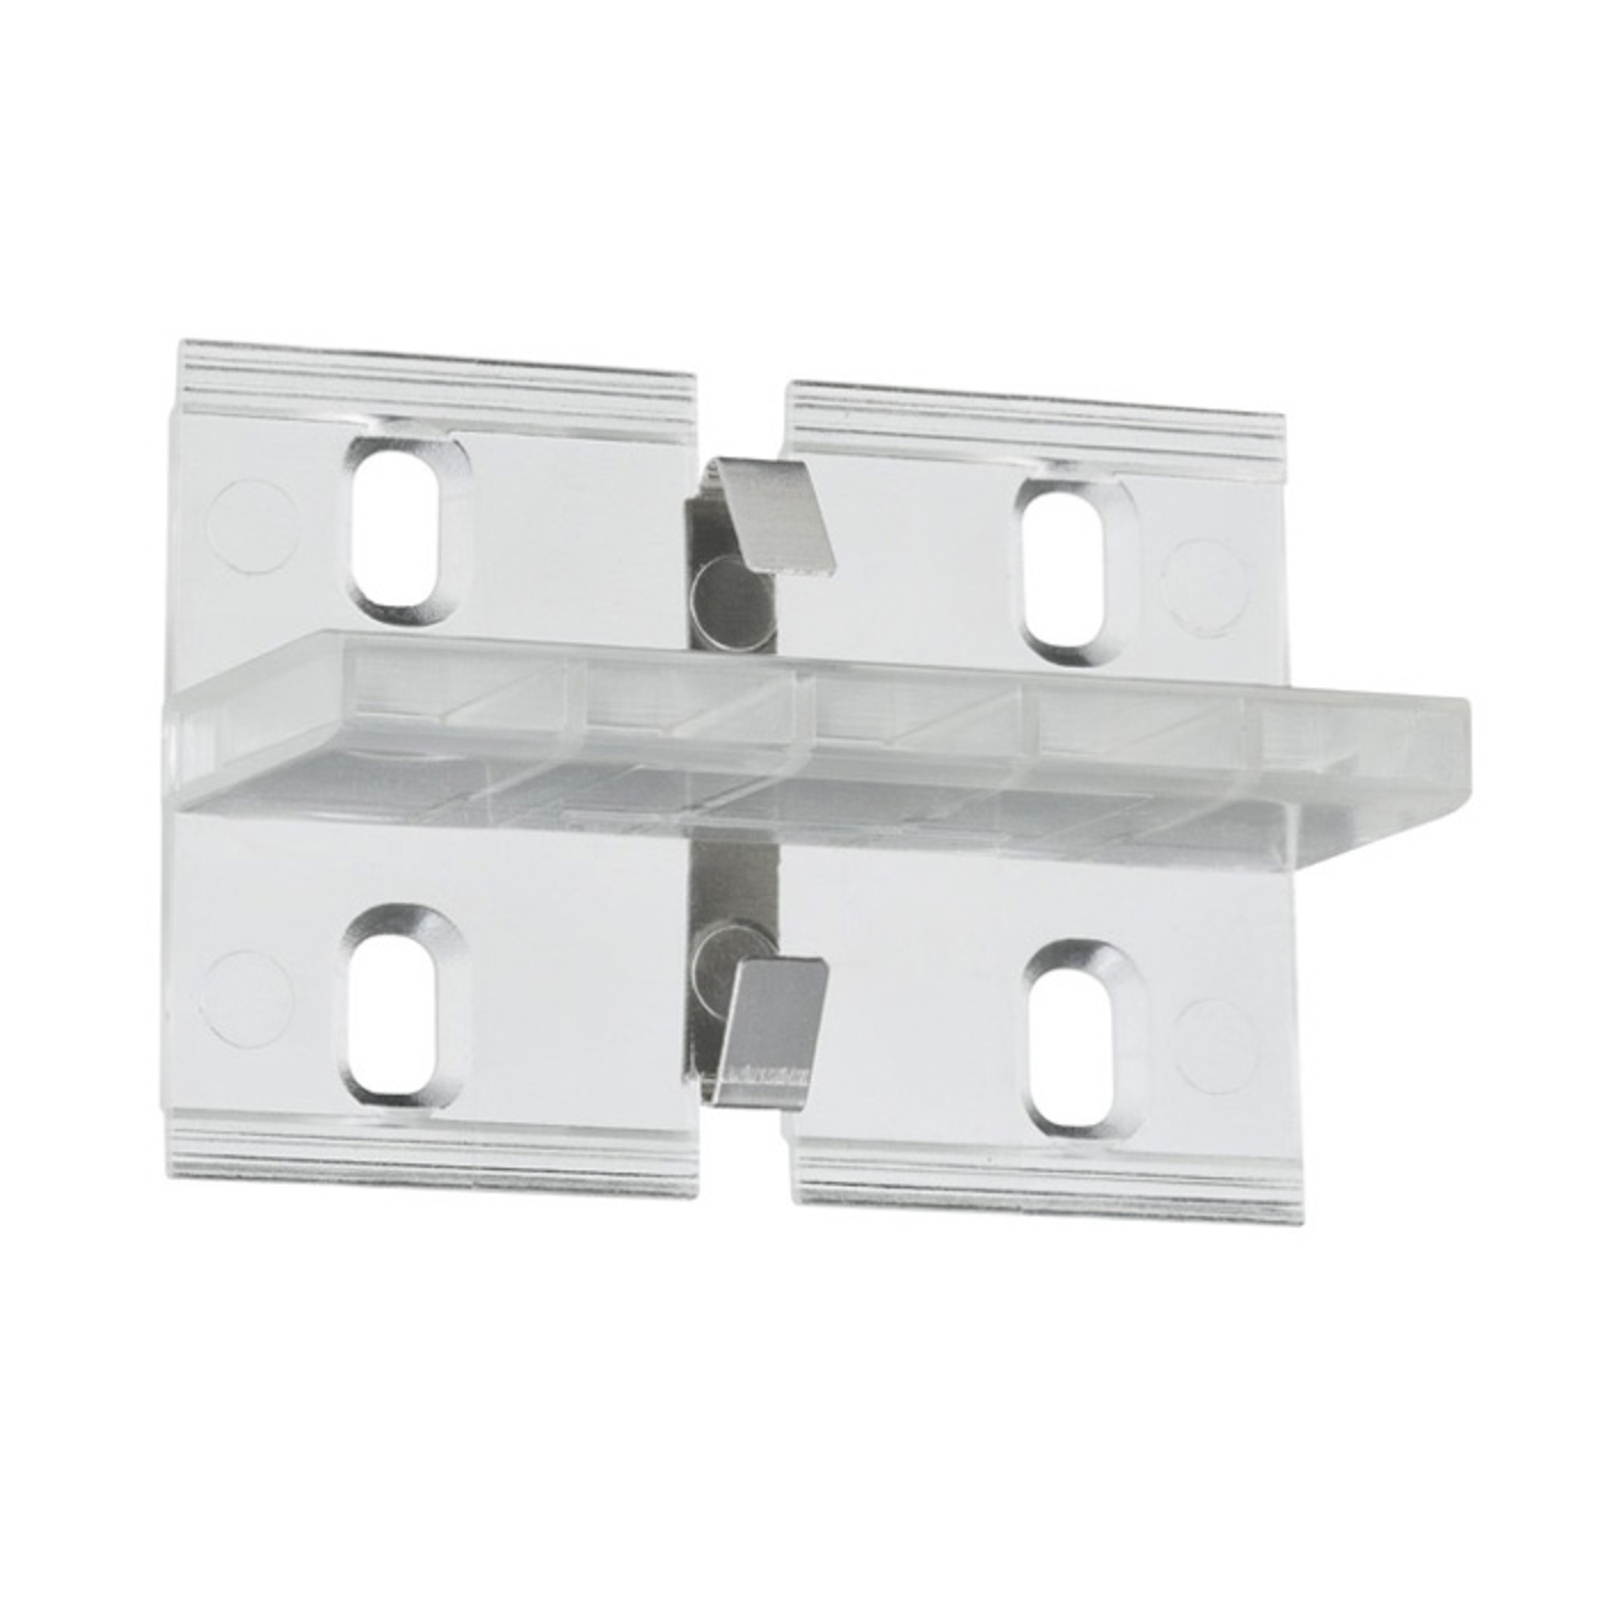 Duo Profile wall bracket for LED strip system